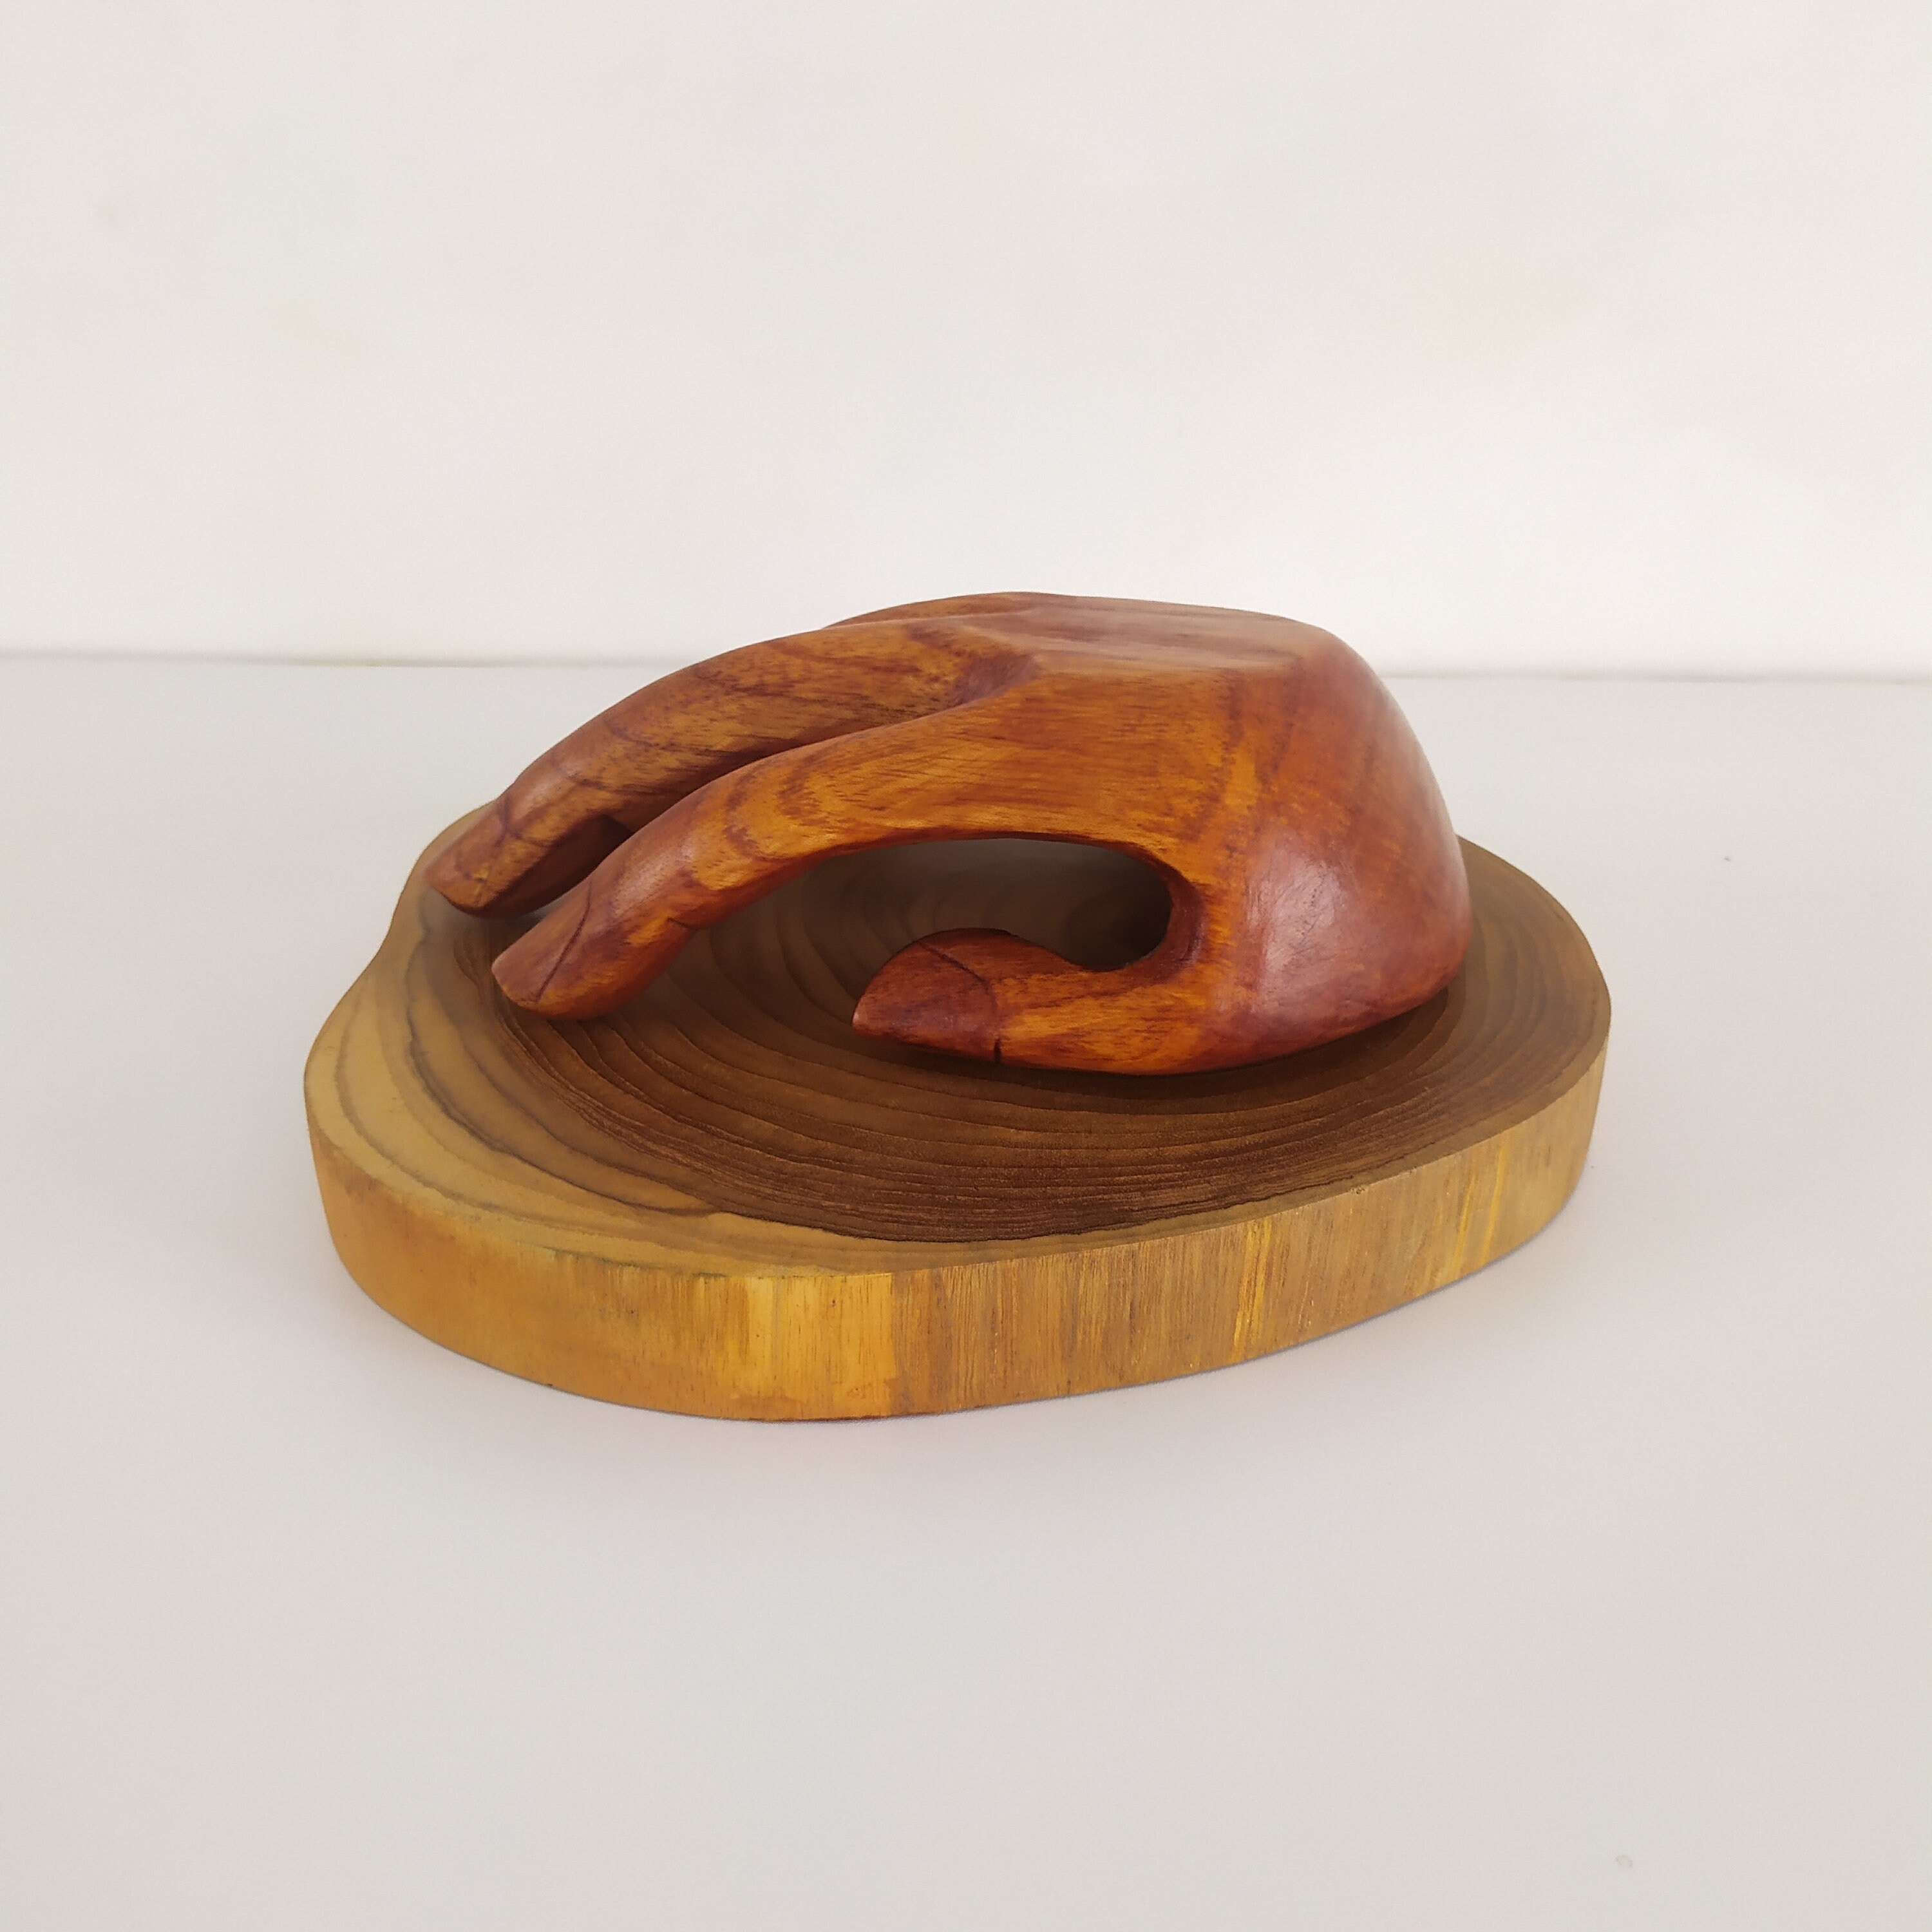 Shop Wood Carving Hand & Wrist Protection